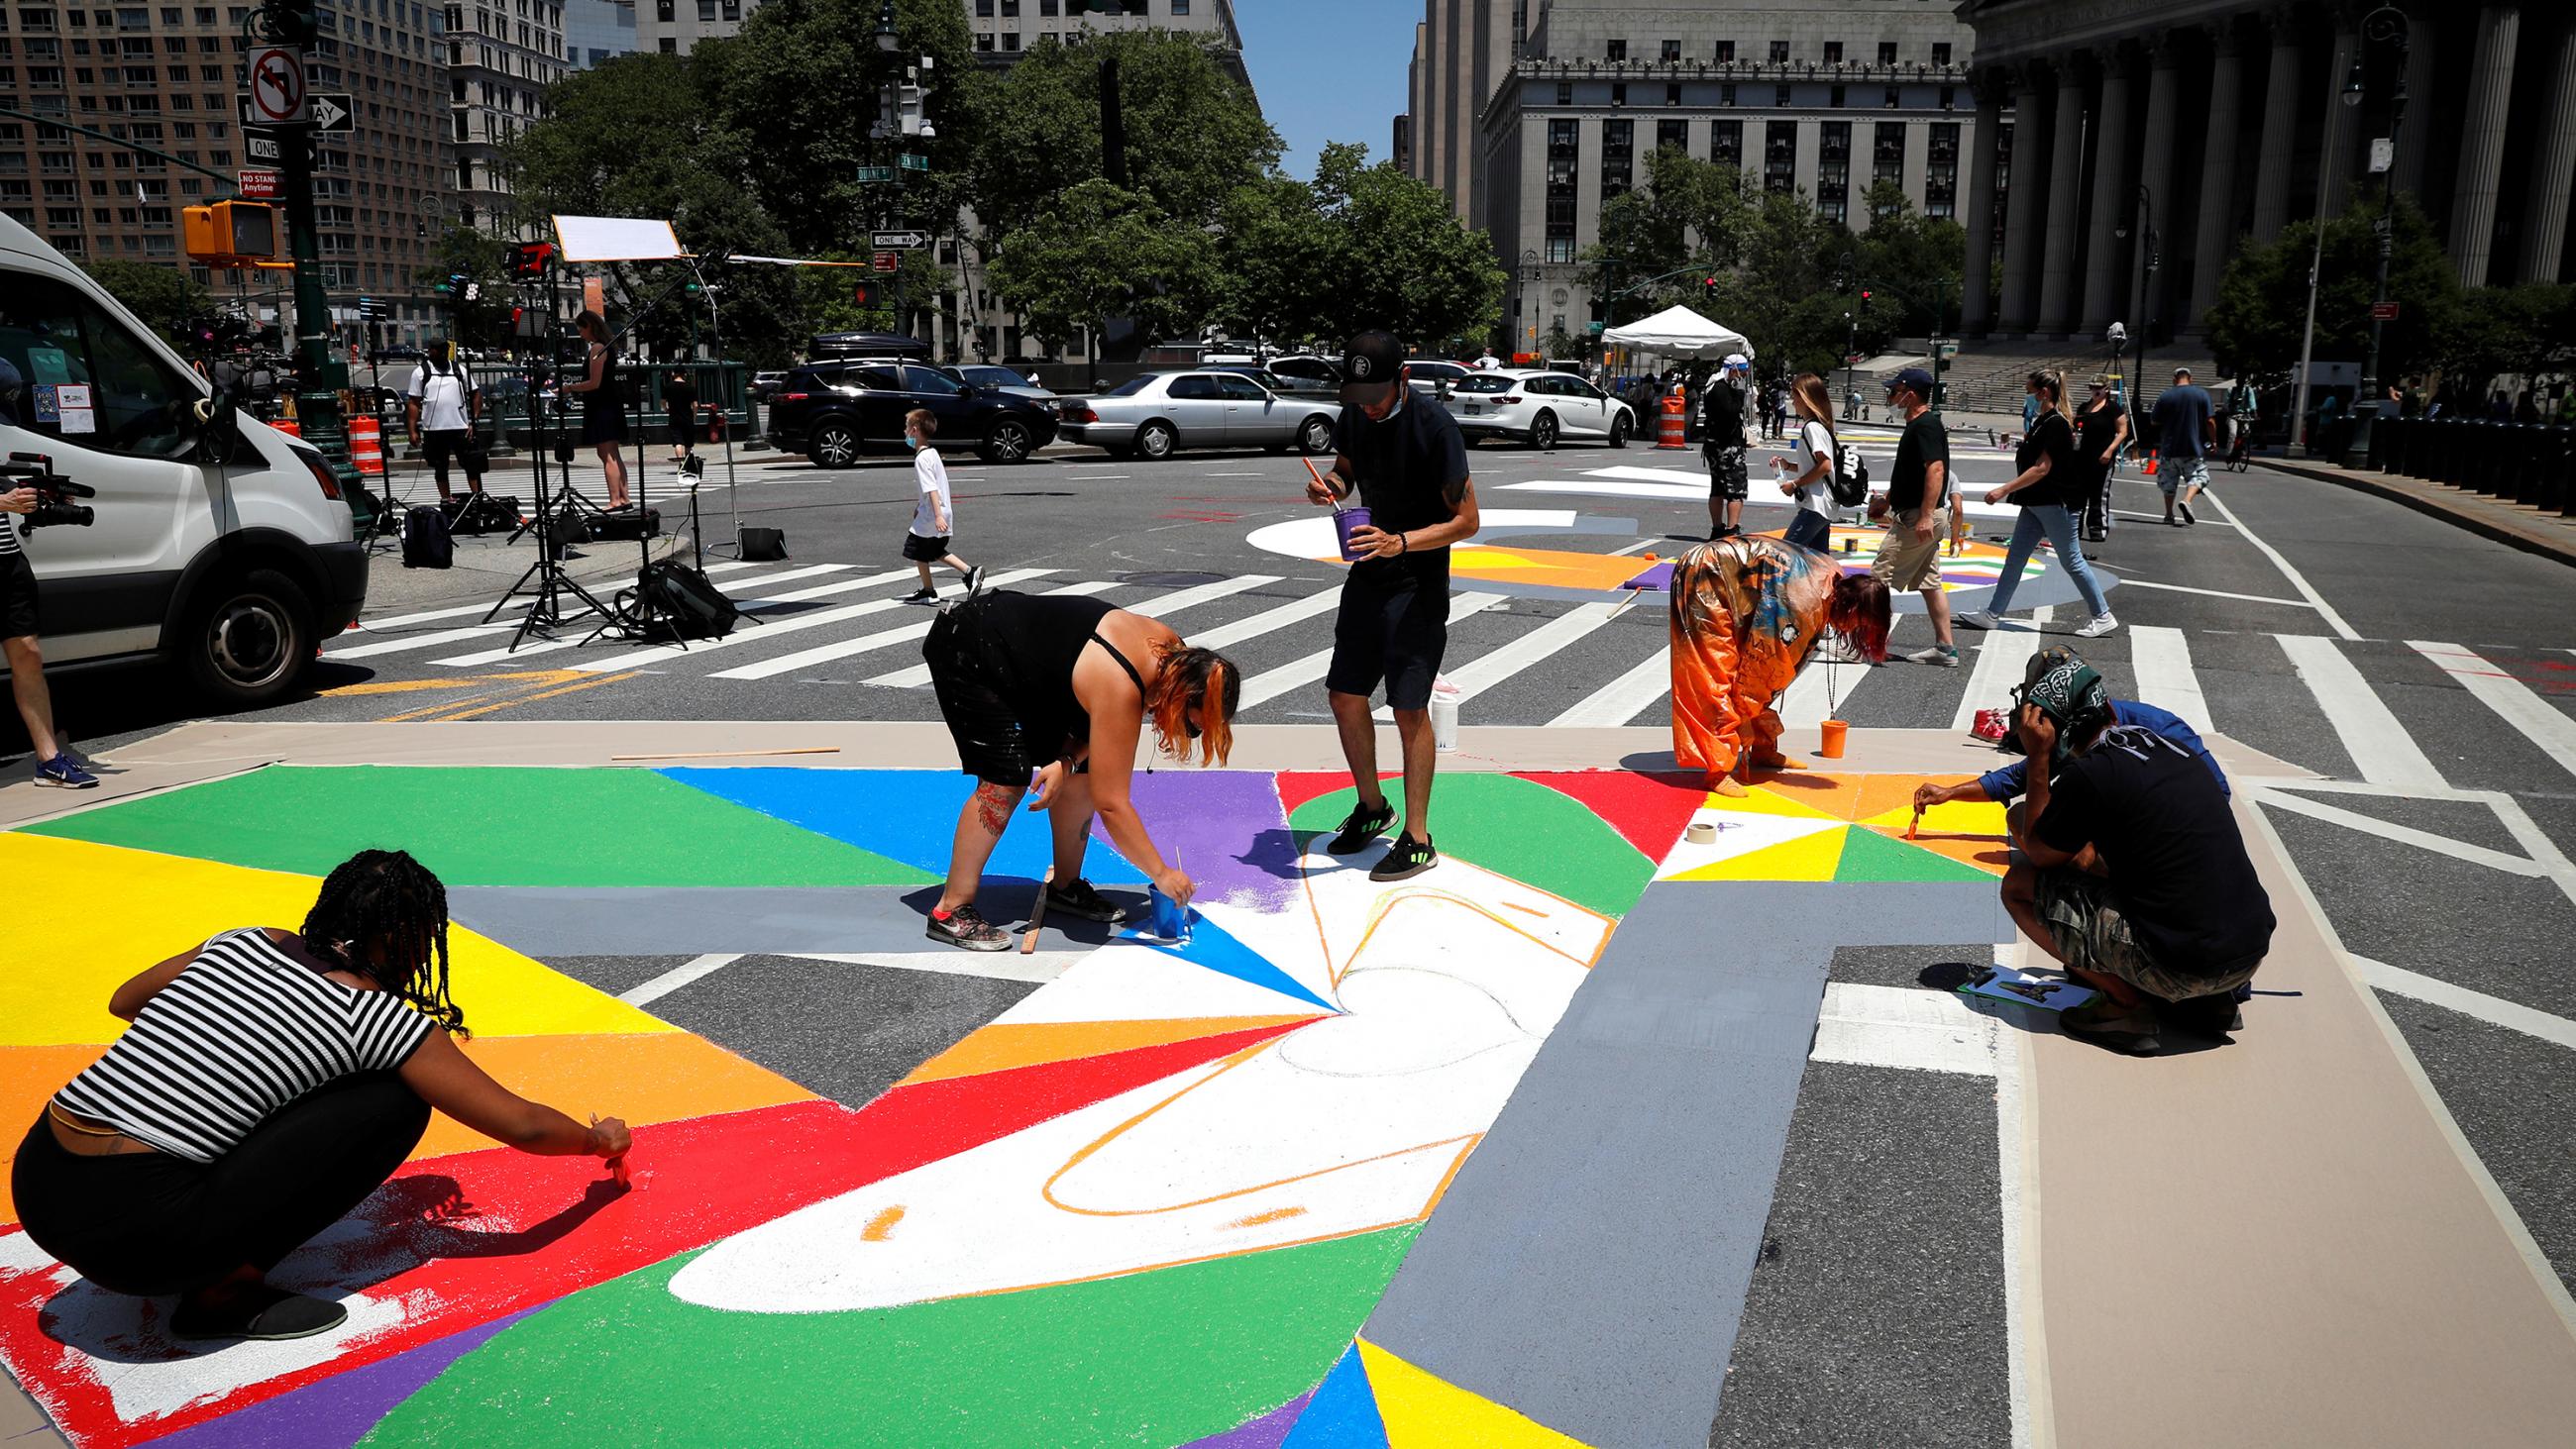 The photo shows people in the streets paining a colorful mural on the ground. 